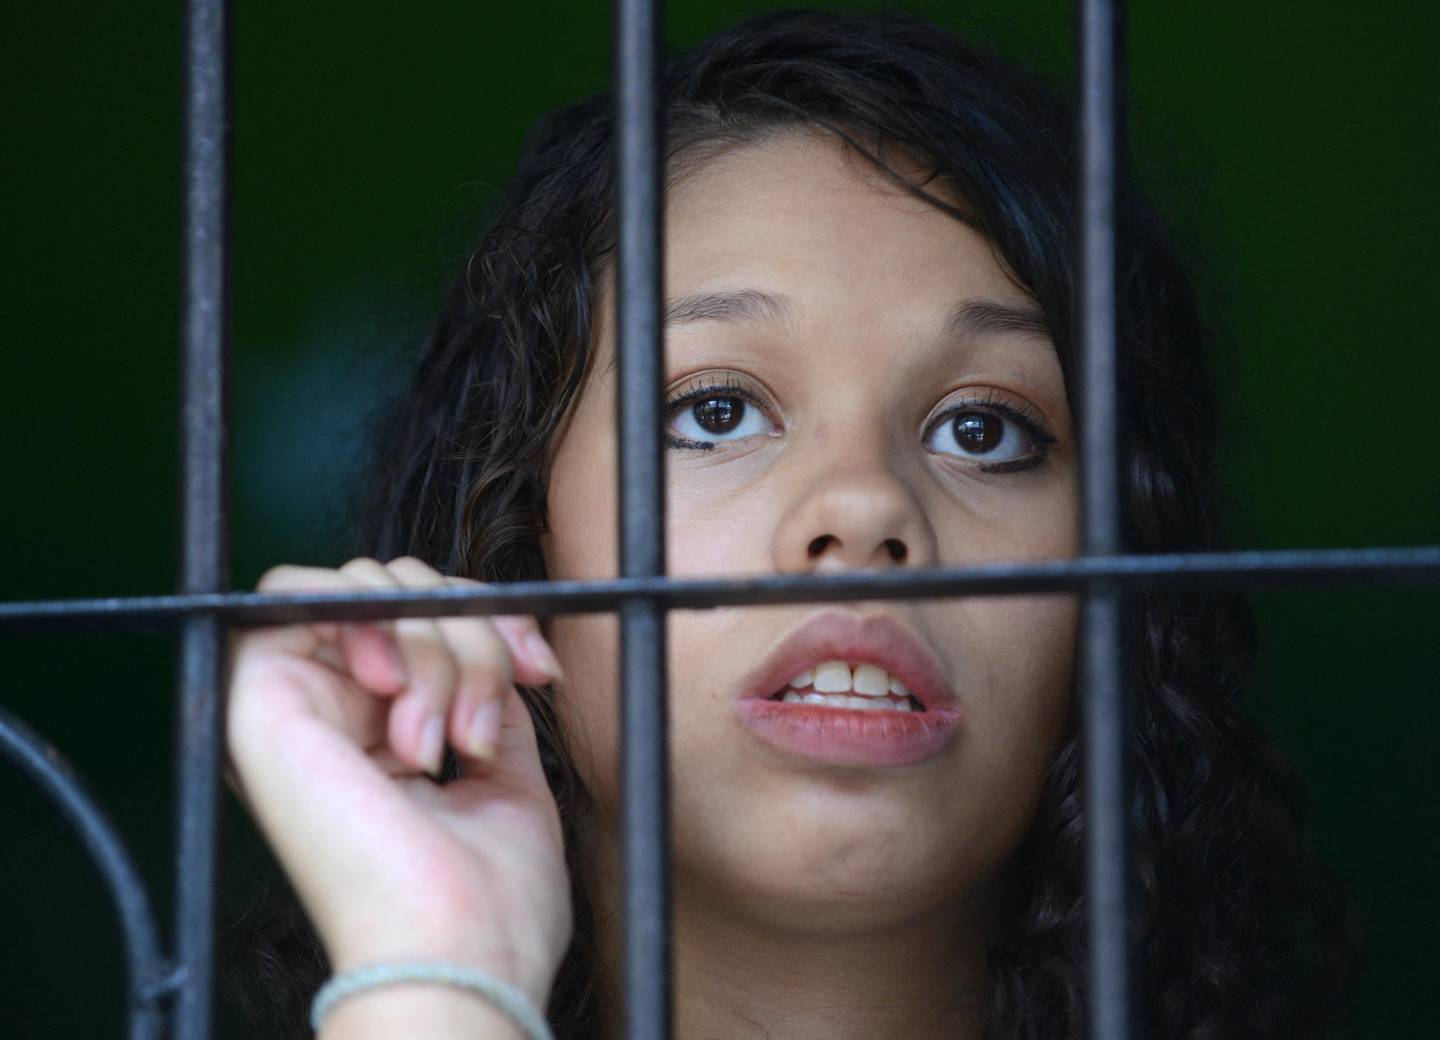 Heather Mack waits inside a holding cell at a court in Denpasar, Bali, during her trial in January 2015. AFP